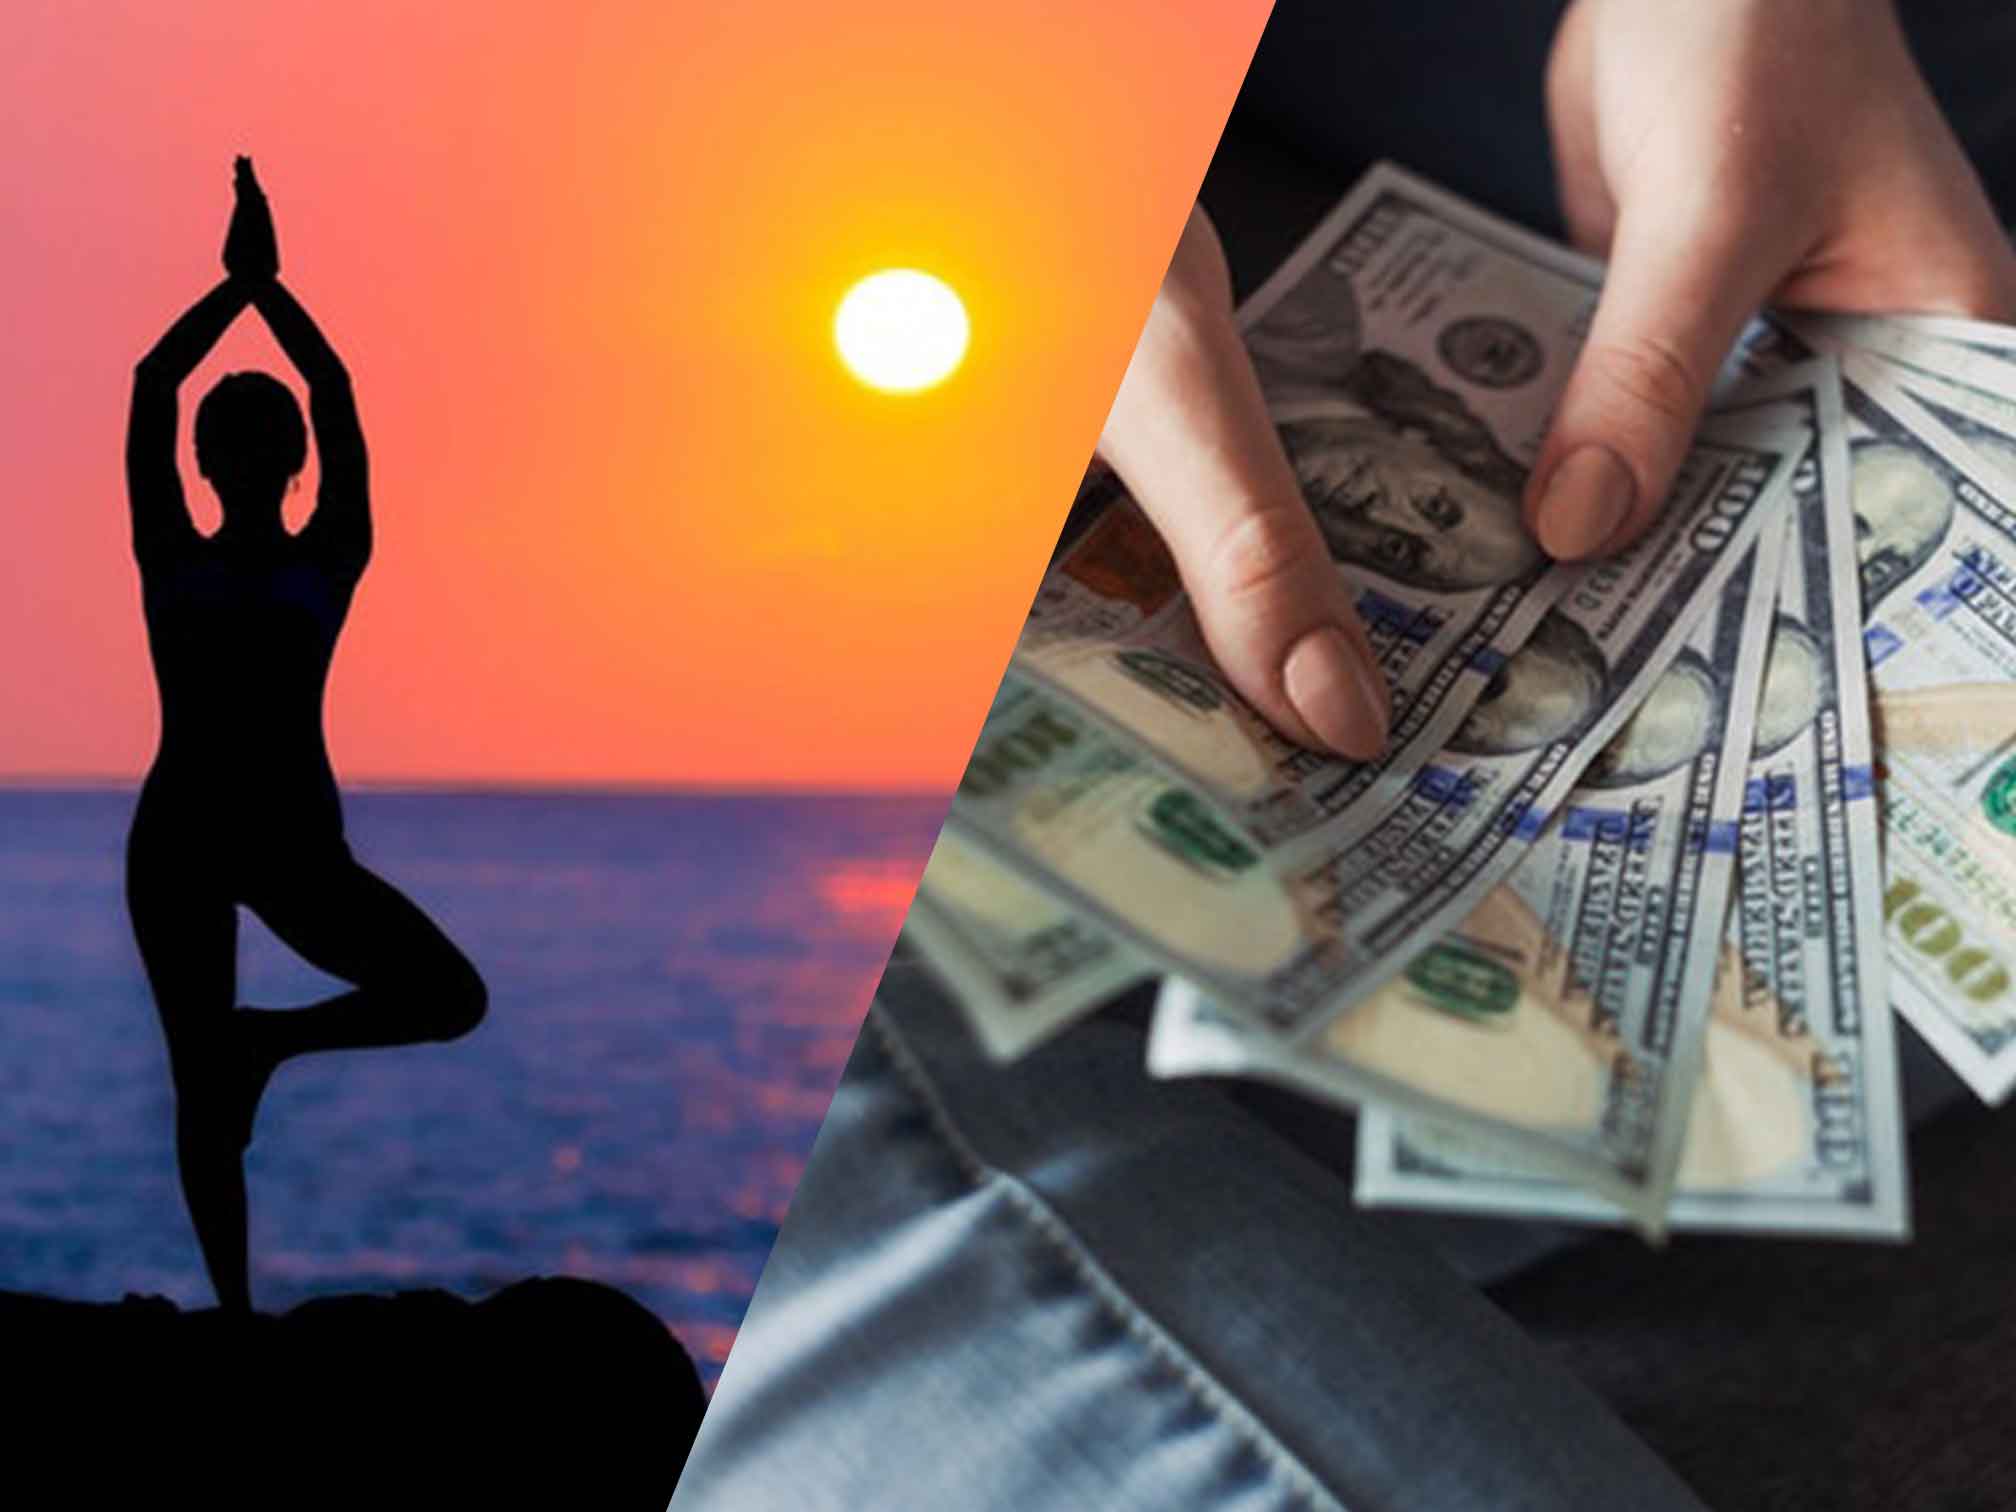 Split image of woman doing yoga during sunset and dollar bills in a persons hand